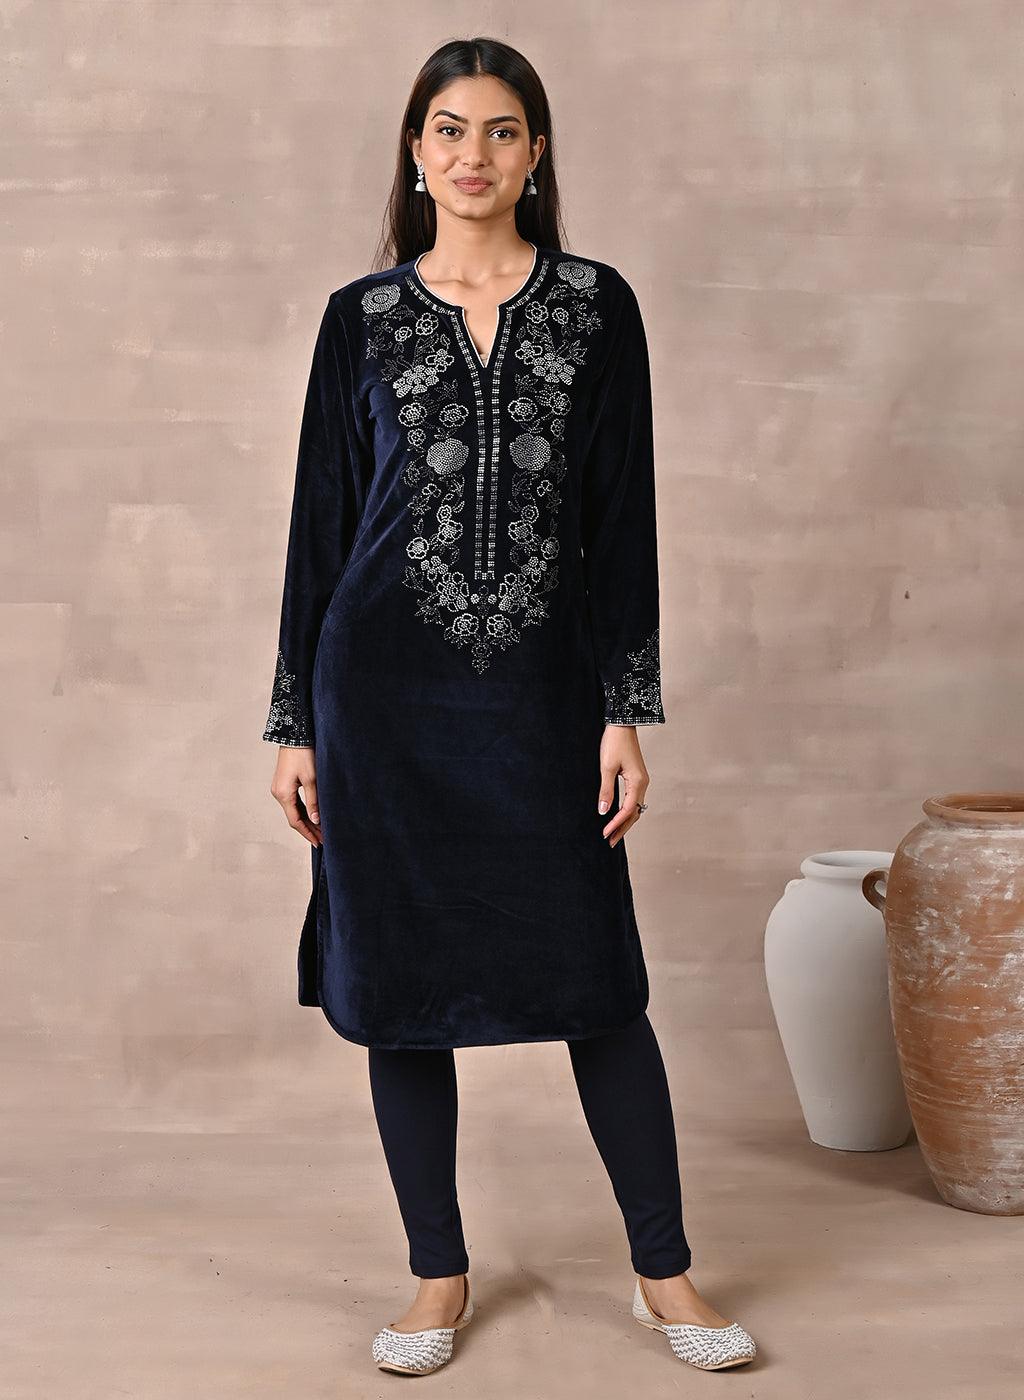 velvet kurtis design, velvet kurtis design Suppliers and